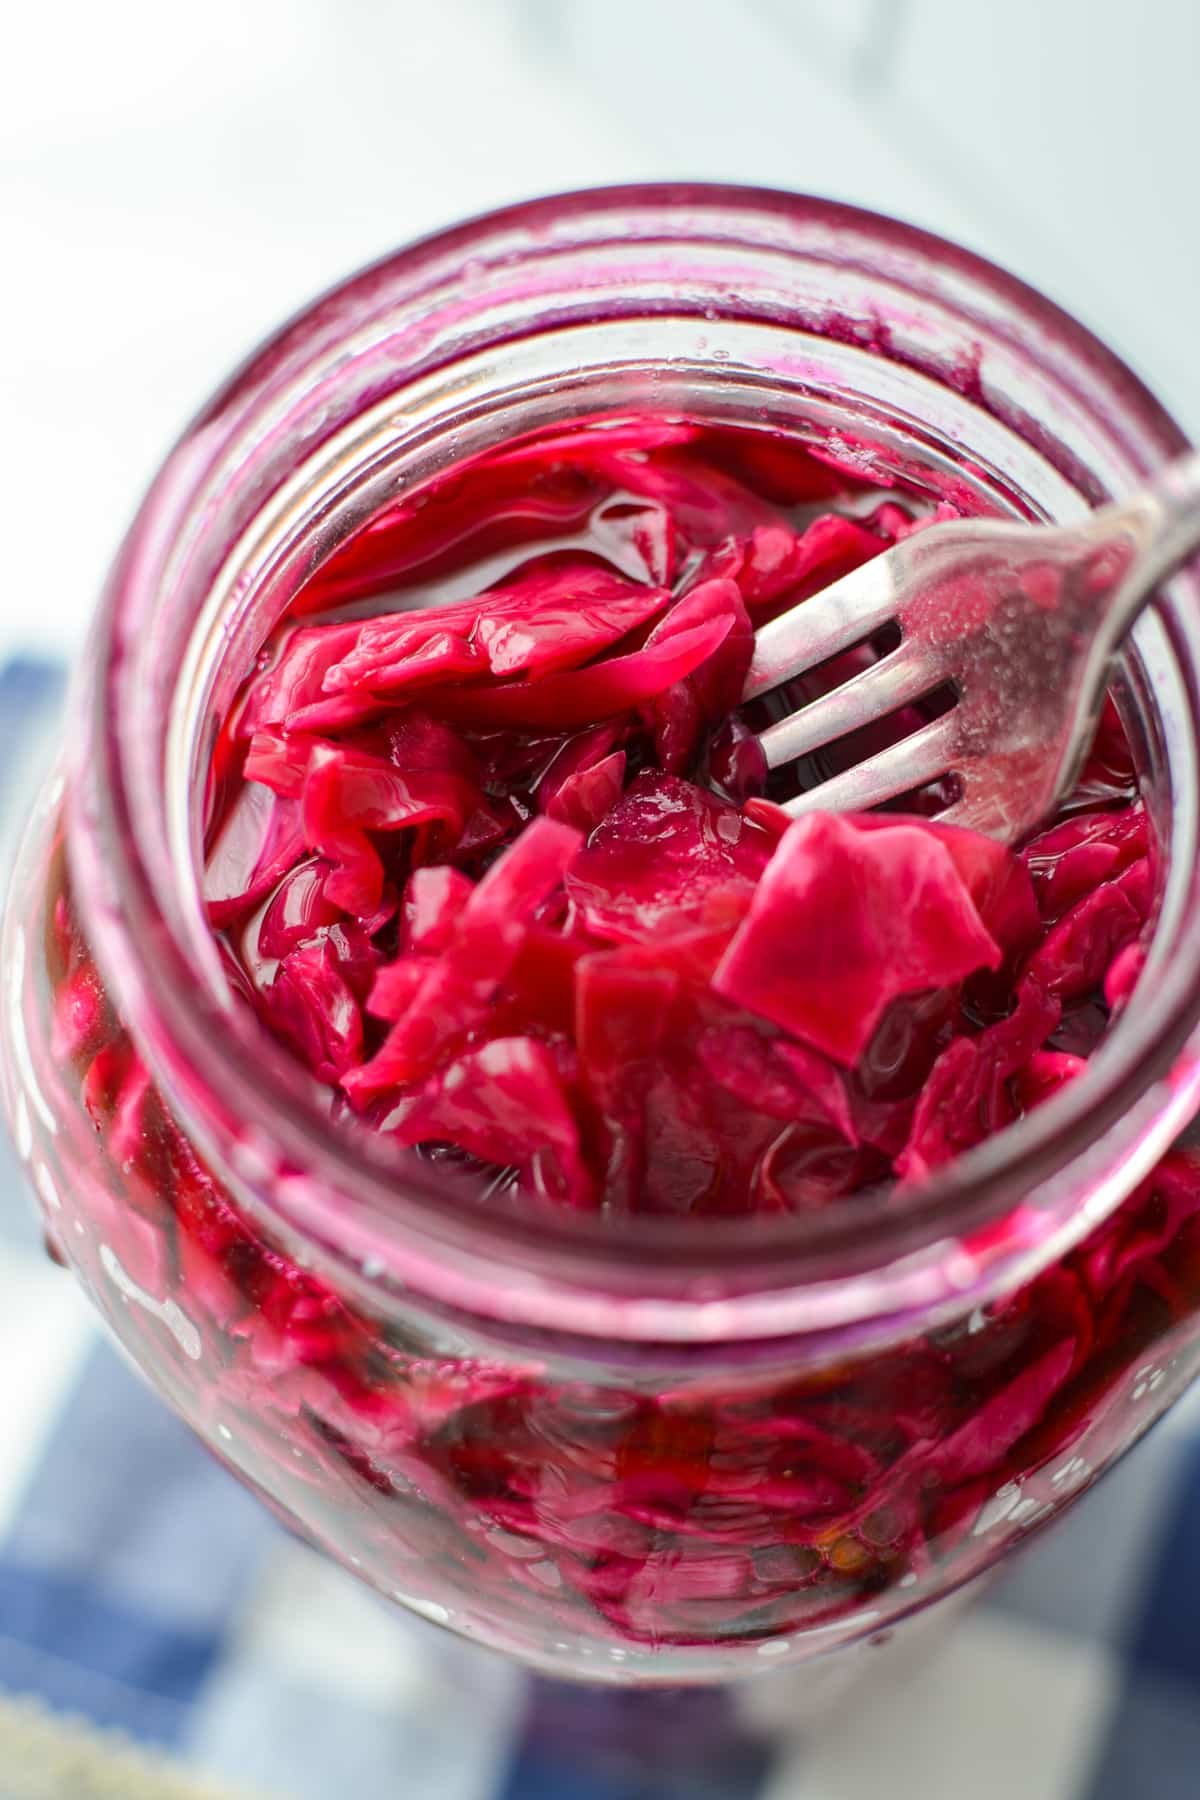 A jar of shredded cabbage that is red/purple in color.